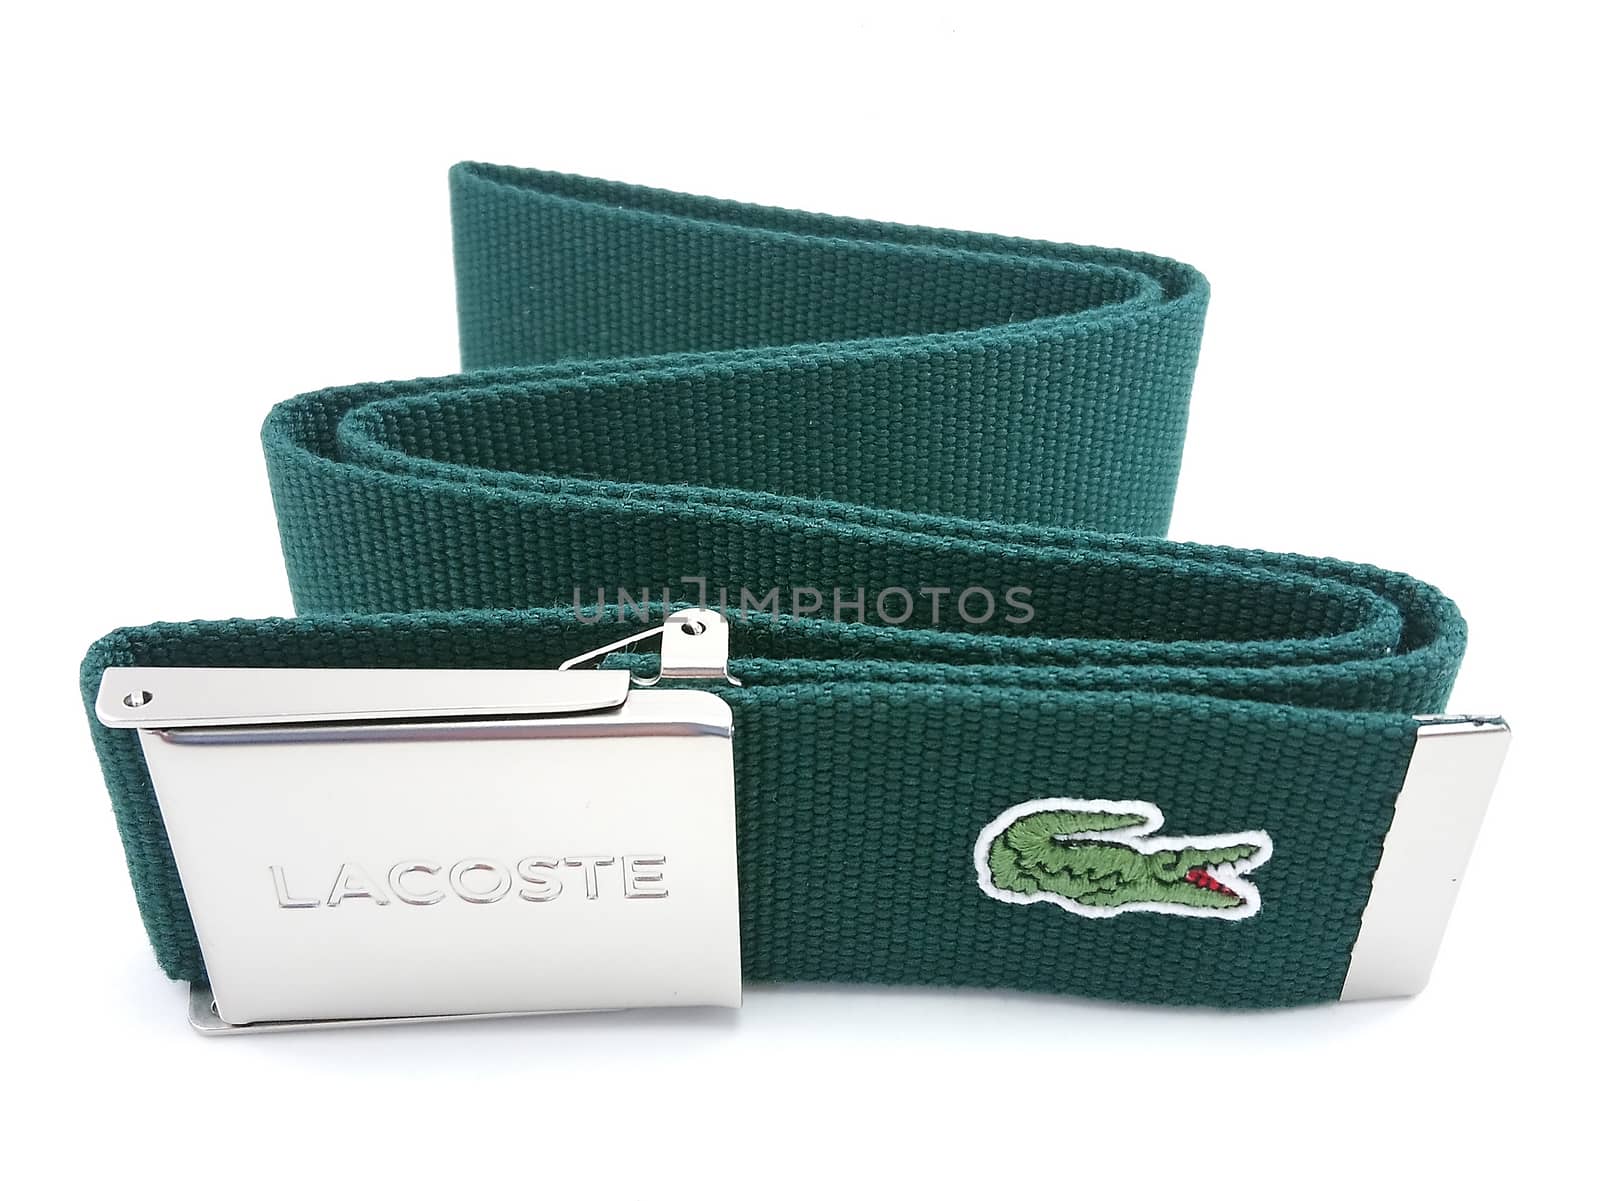 MANILA, PH - SEPT 22 - Lacoste mens belt green color with metal buckle on September 22, 2020 in Manila, Philippines.